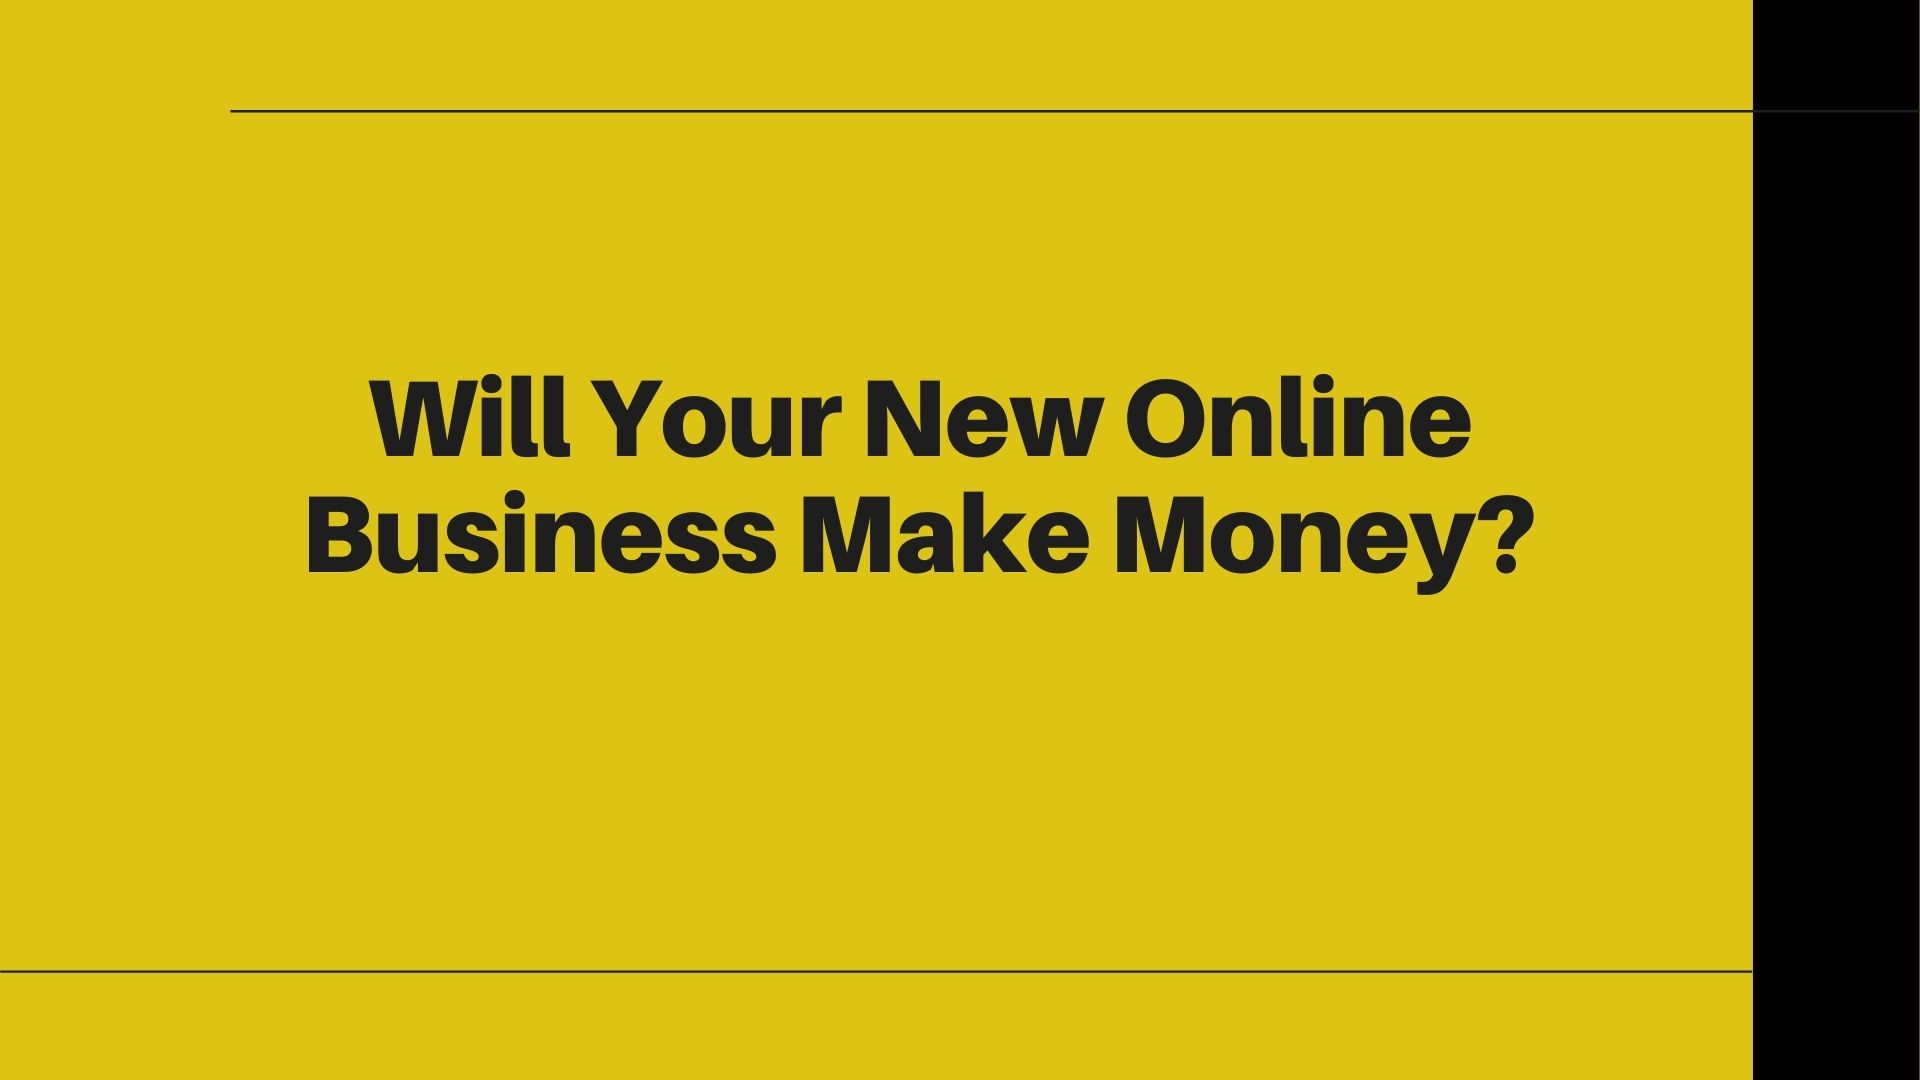 Will Your New Online Business Make Money